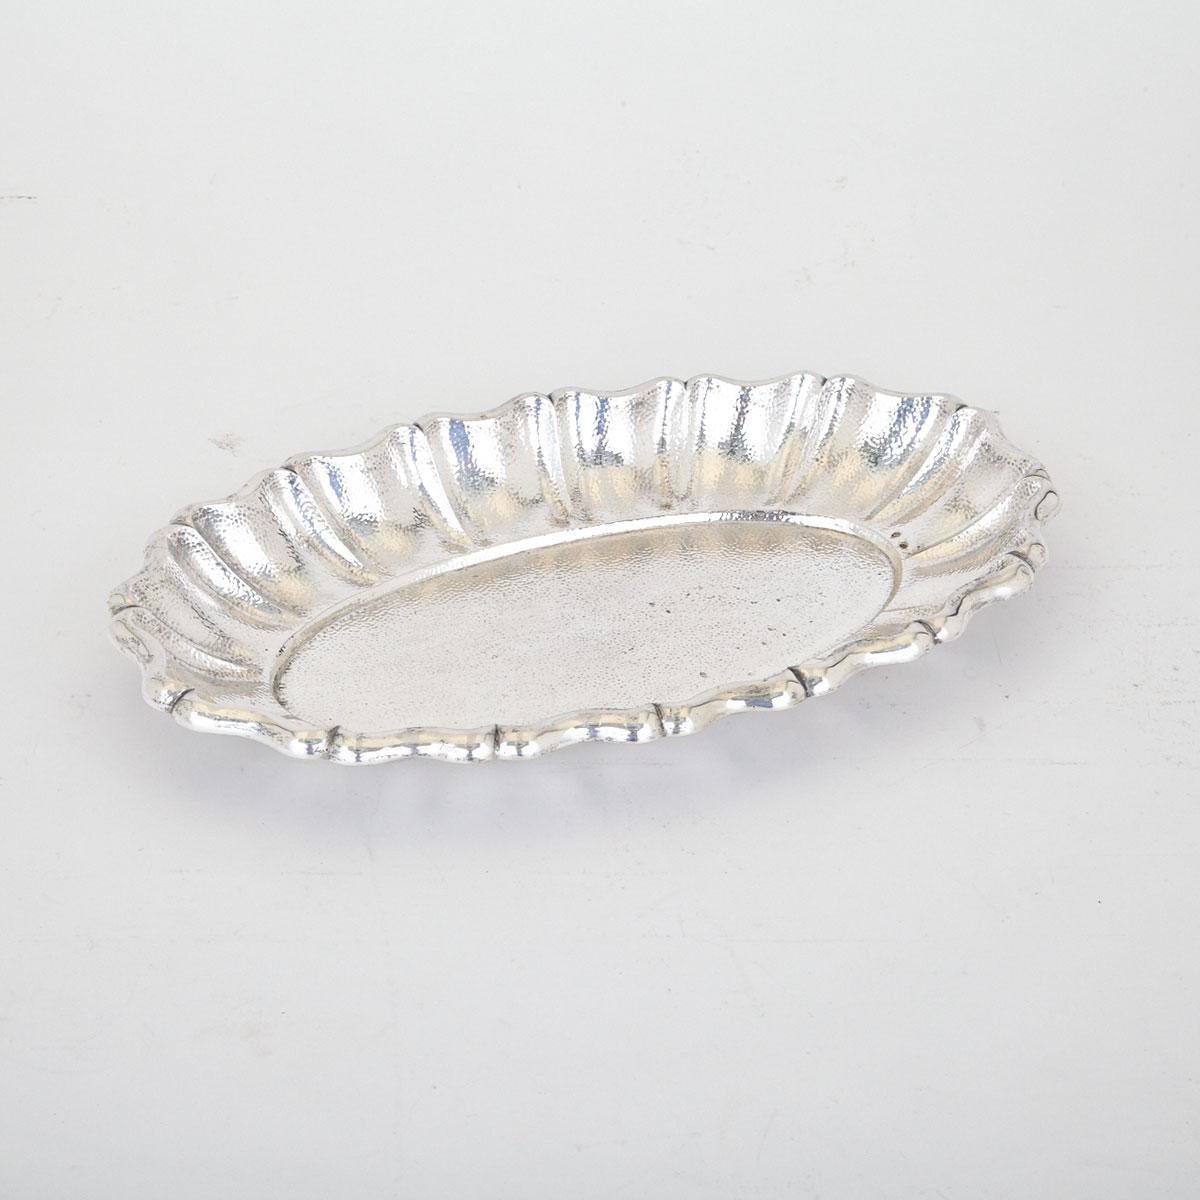 Hungarian Silver Shaped Oval Dish, 20th Century